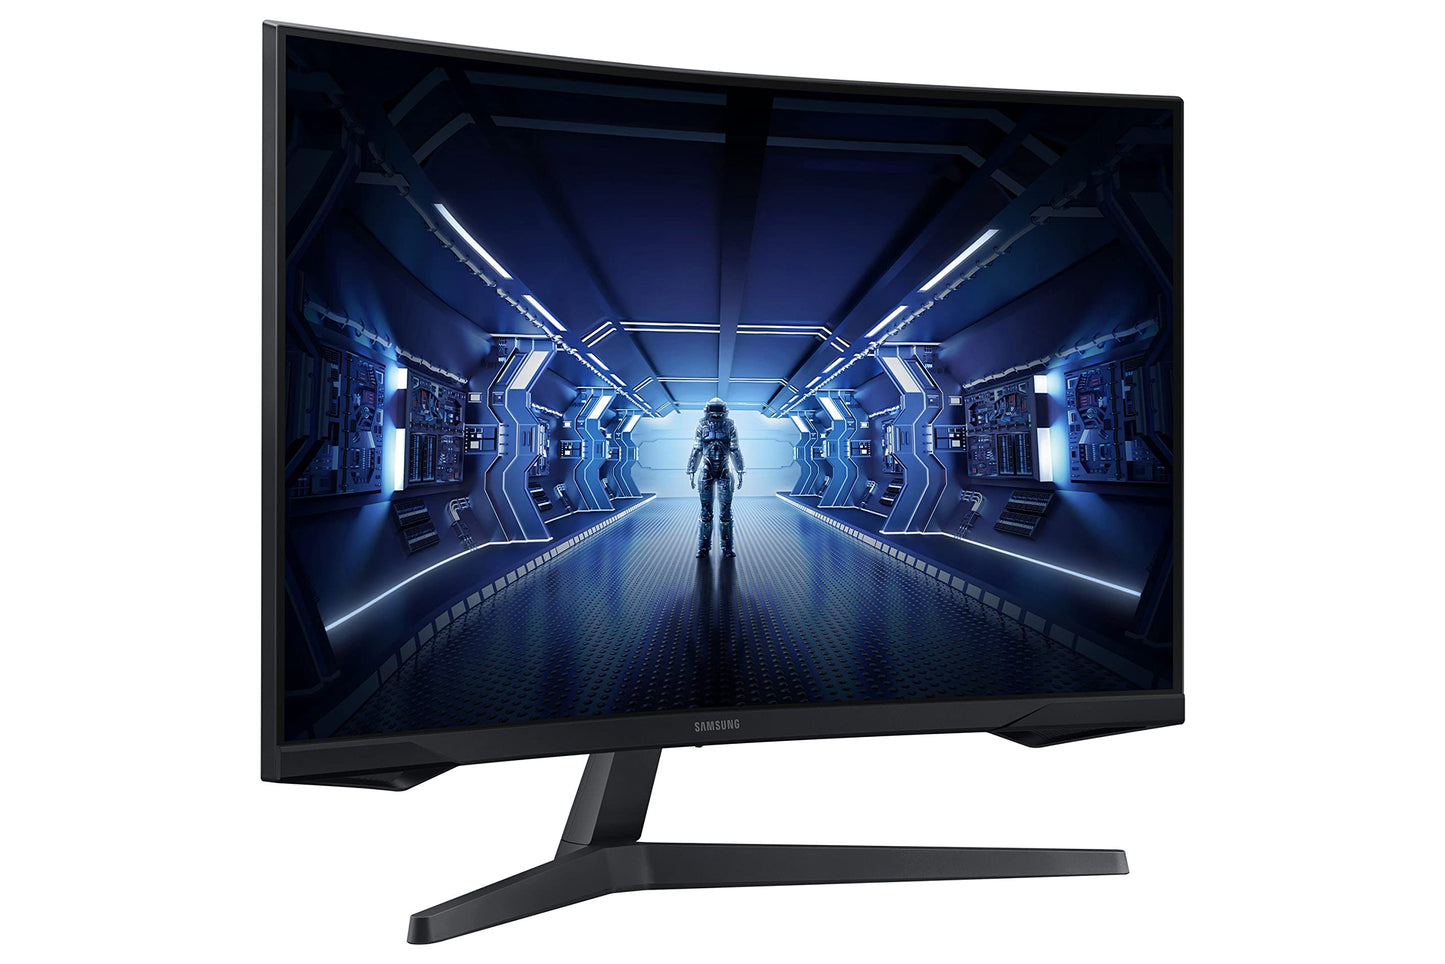 Samsung 27" Odyssey G5 LC27G55, 1000R Curved Gaming Monitor with 144Hz Refresh Rate & 1ms Response Time, WQHD Resolution, AMD FreeSync Premium - LC27G55TQBMXUE Black